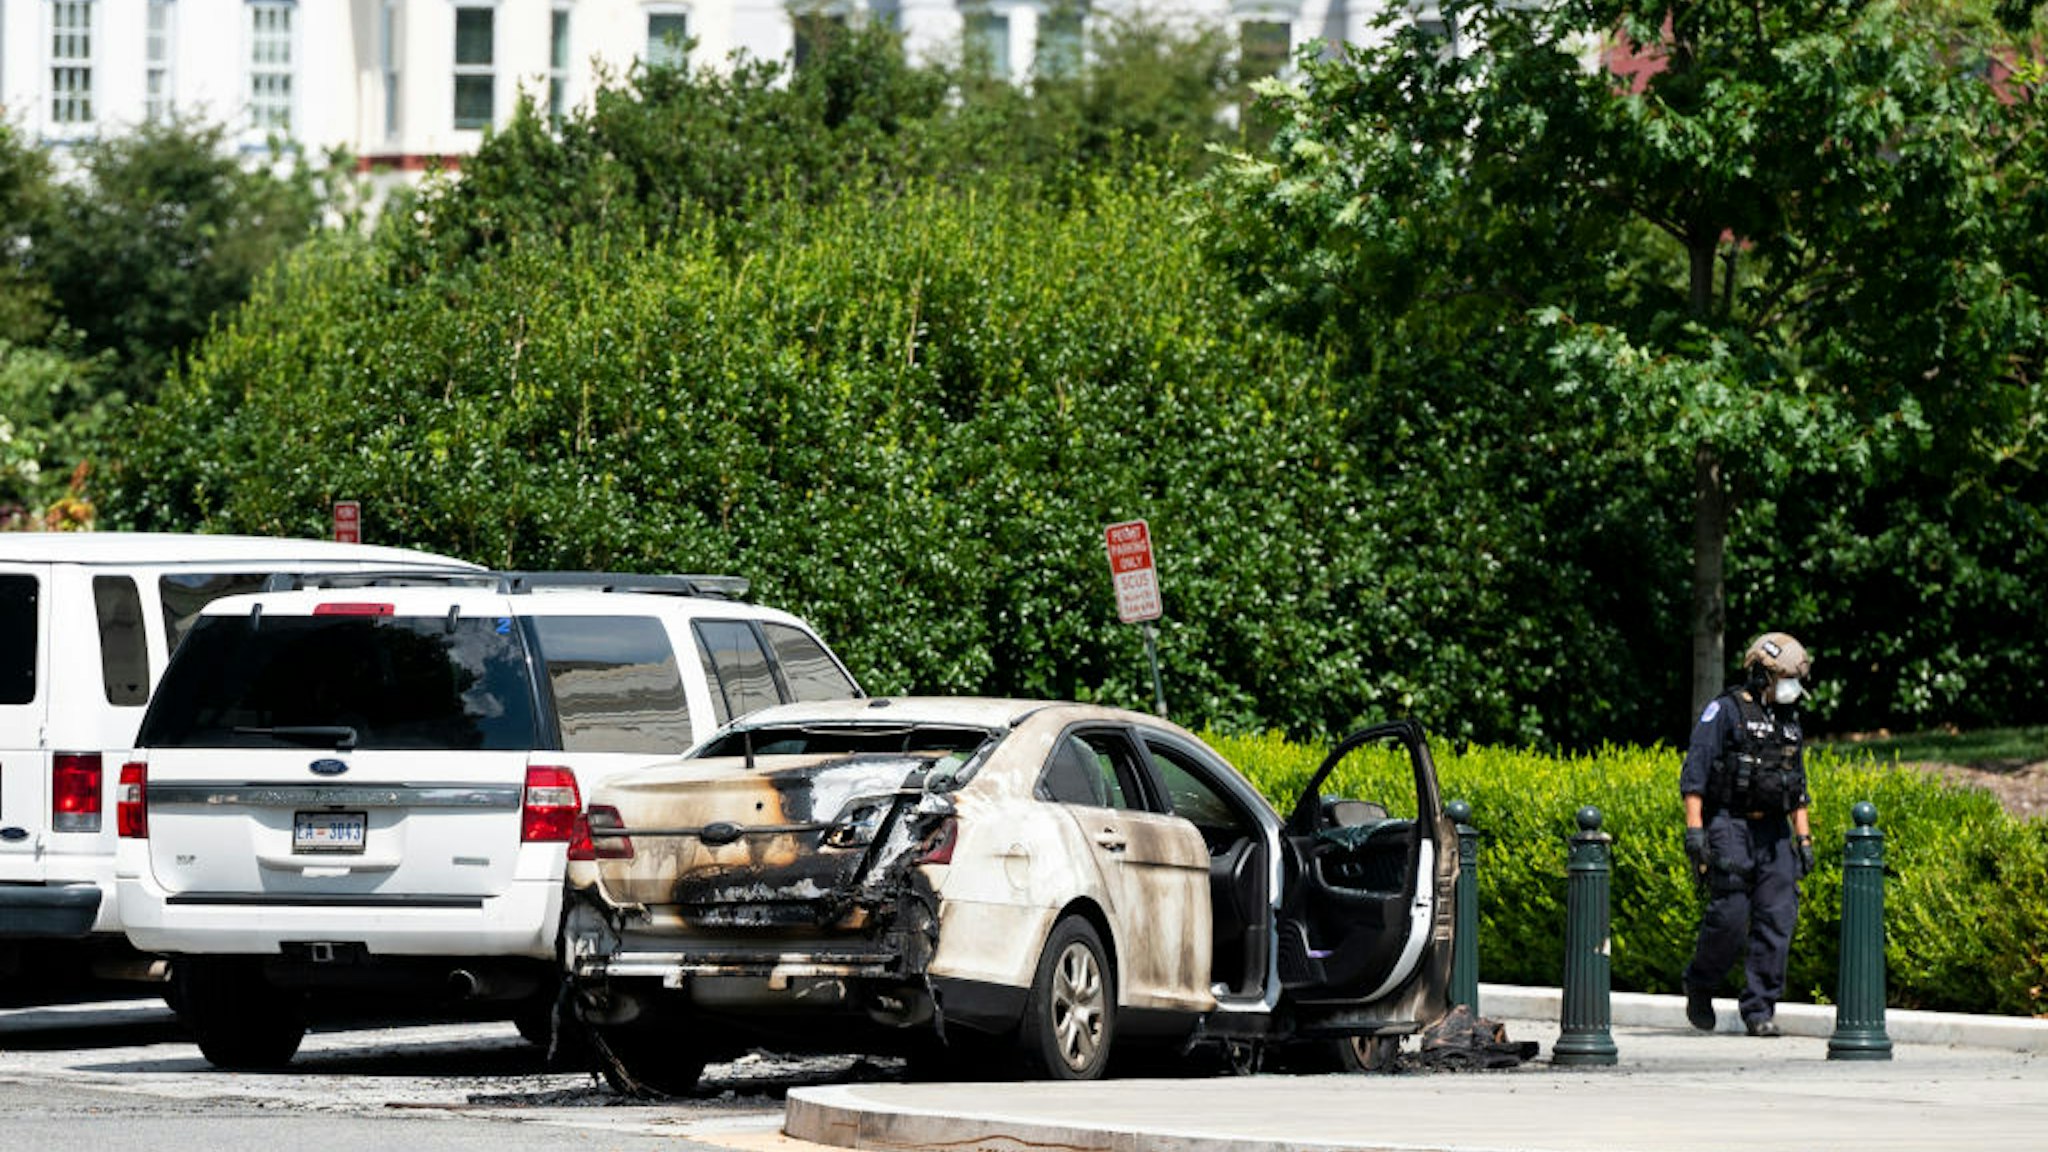 UNITED STATES - JULY 15: Police investigate a burned out car parked outside the U.S. Supreme Court building i9n Washington on Wednesday, July 15, 2020.